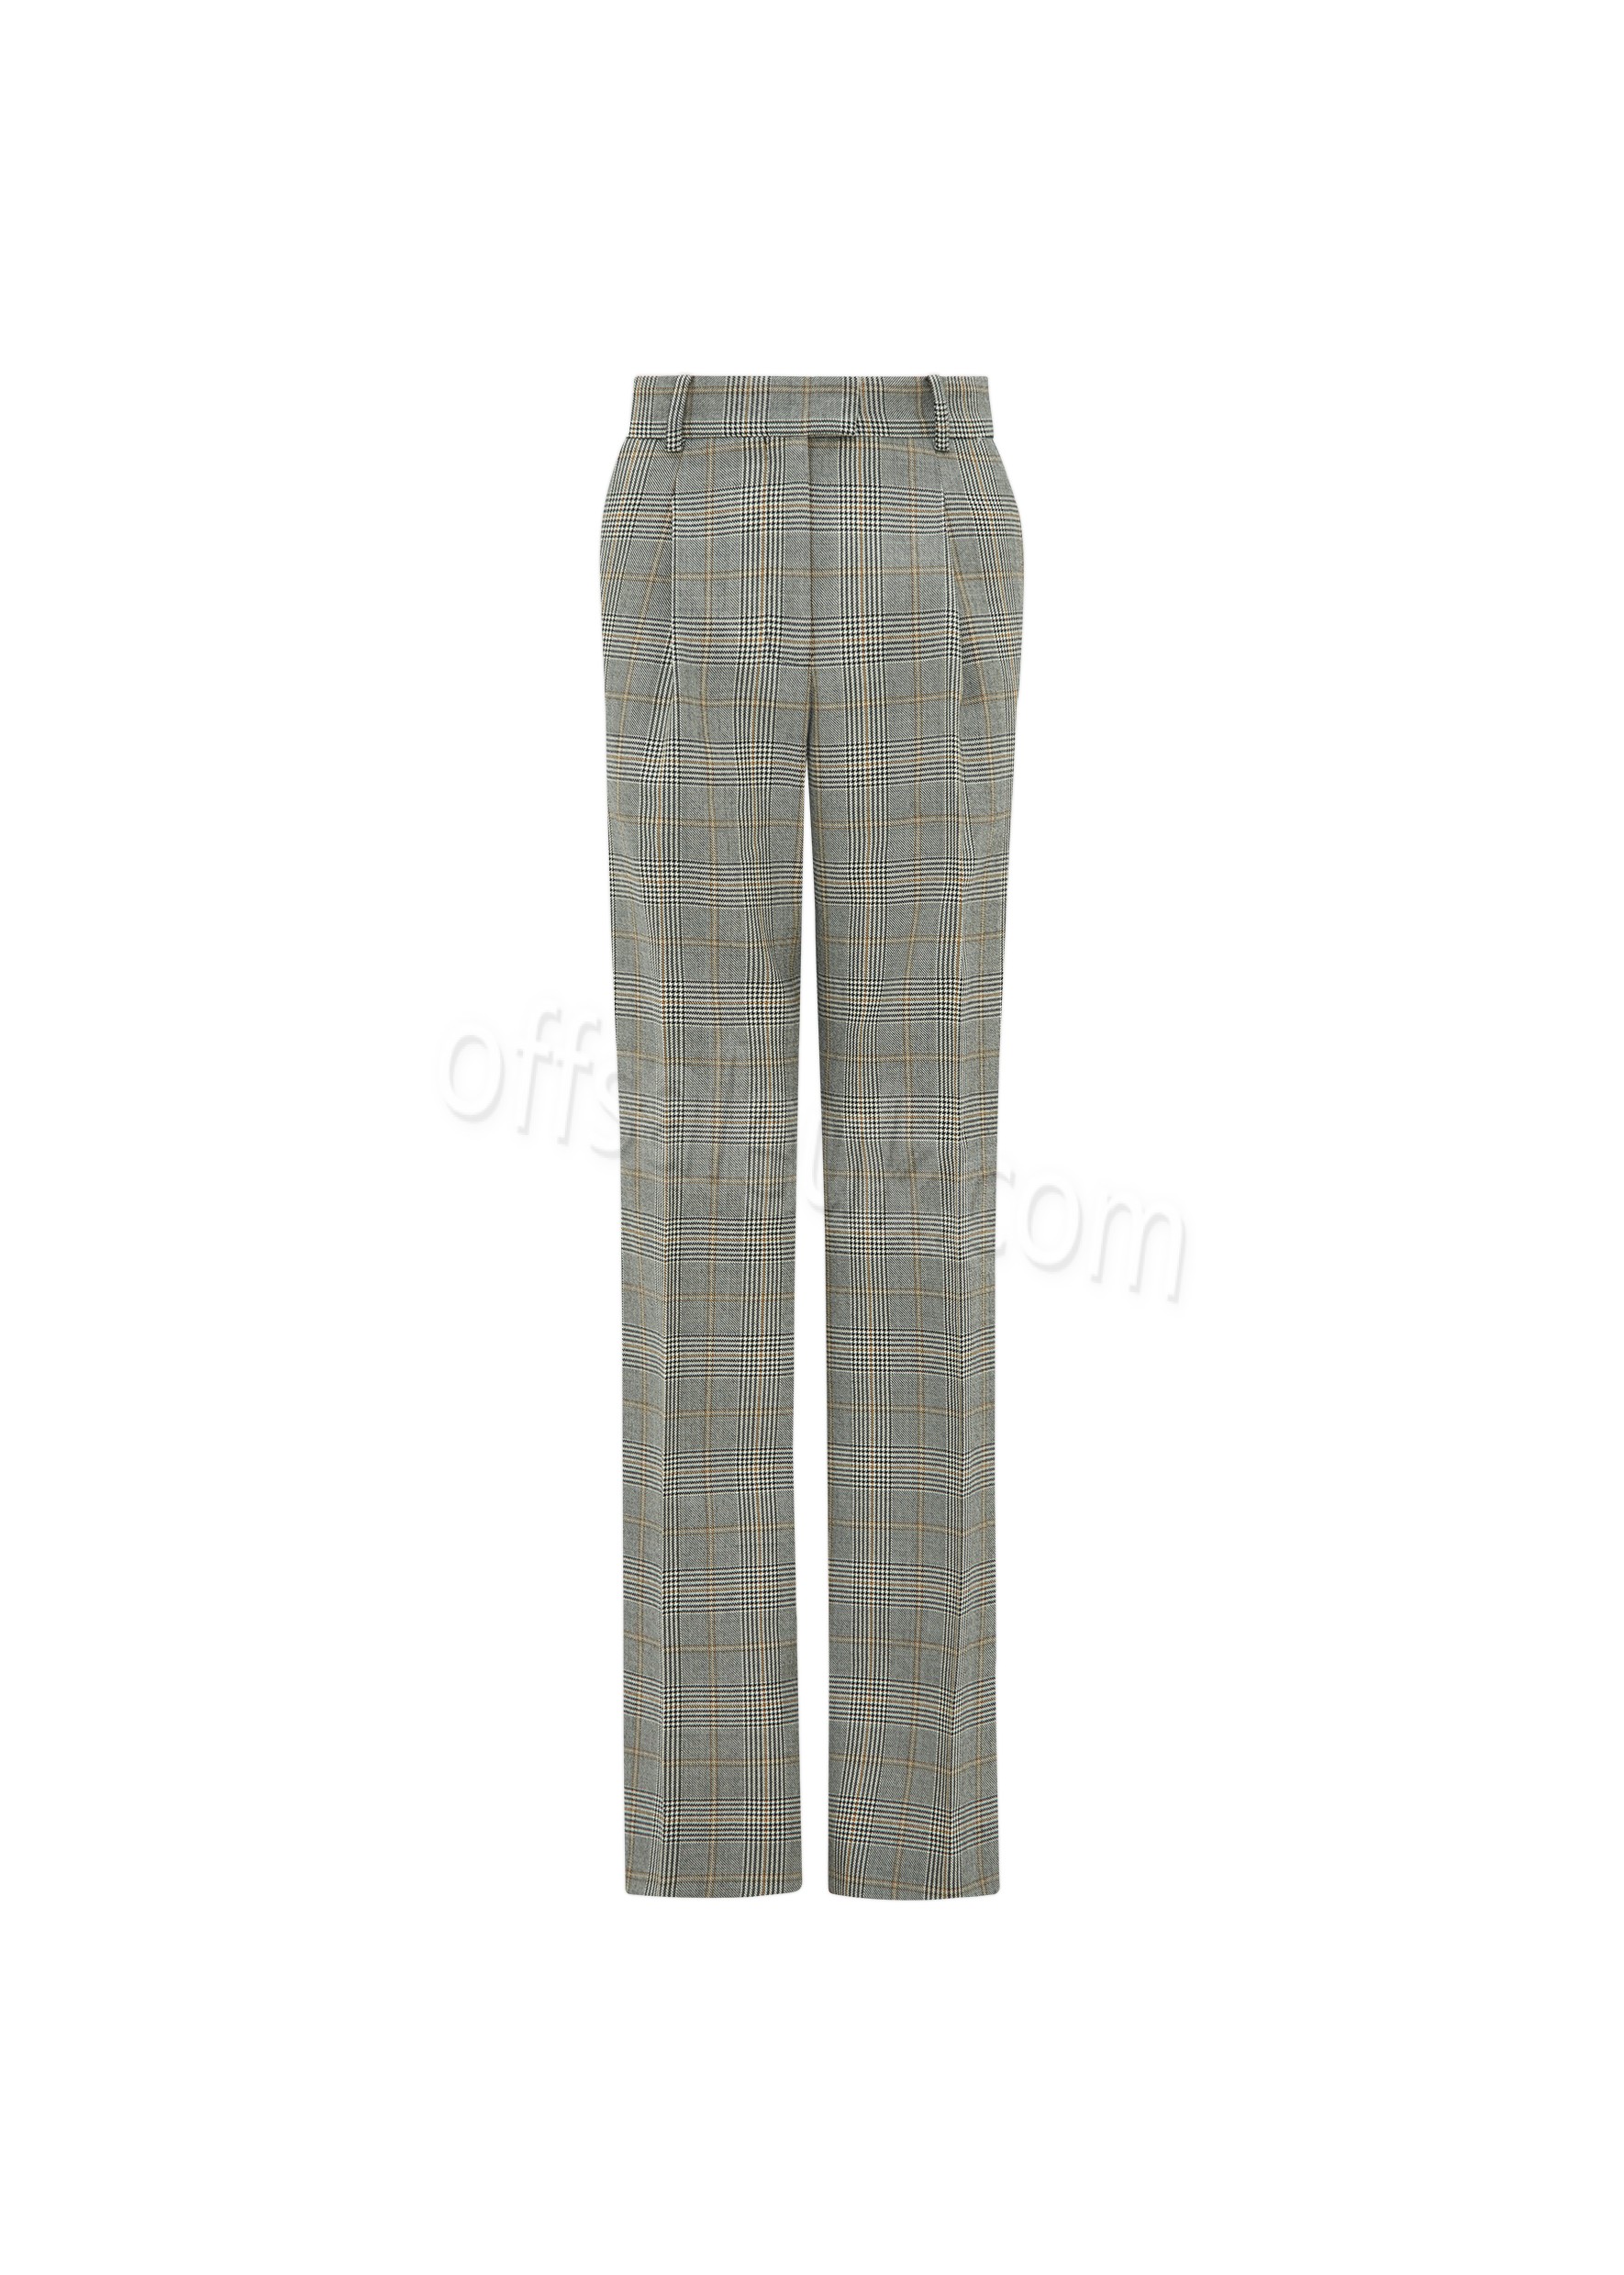 Discount Prince Of Wales Pleated Angie Trouser - Discount Prince Of Wales Pleated Angie Trouser